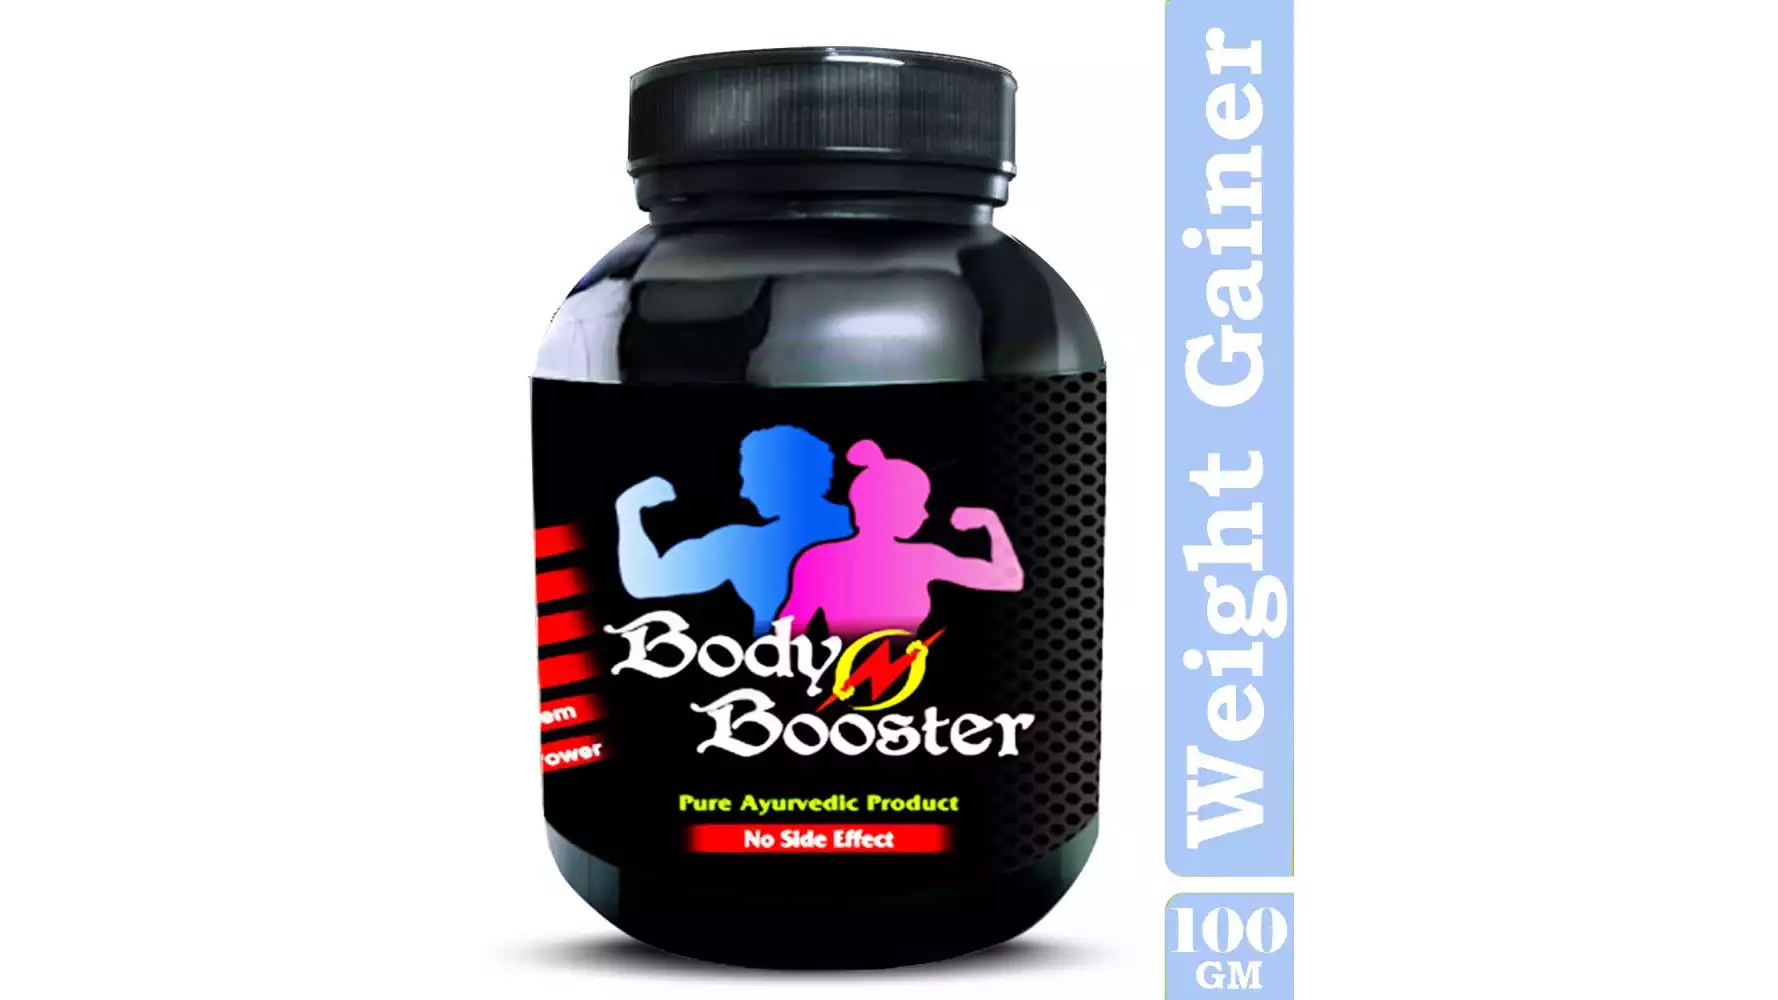 Pharma Science Body Booster Herbal Supplement Powder (100g)